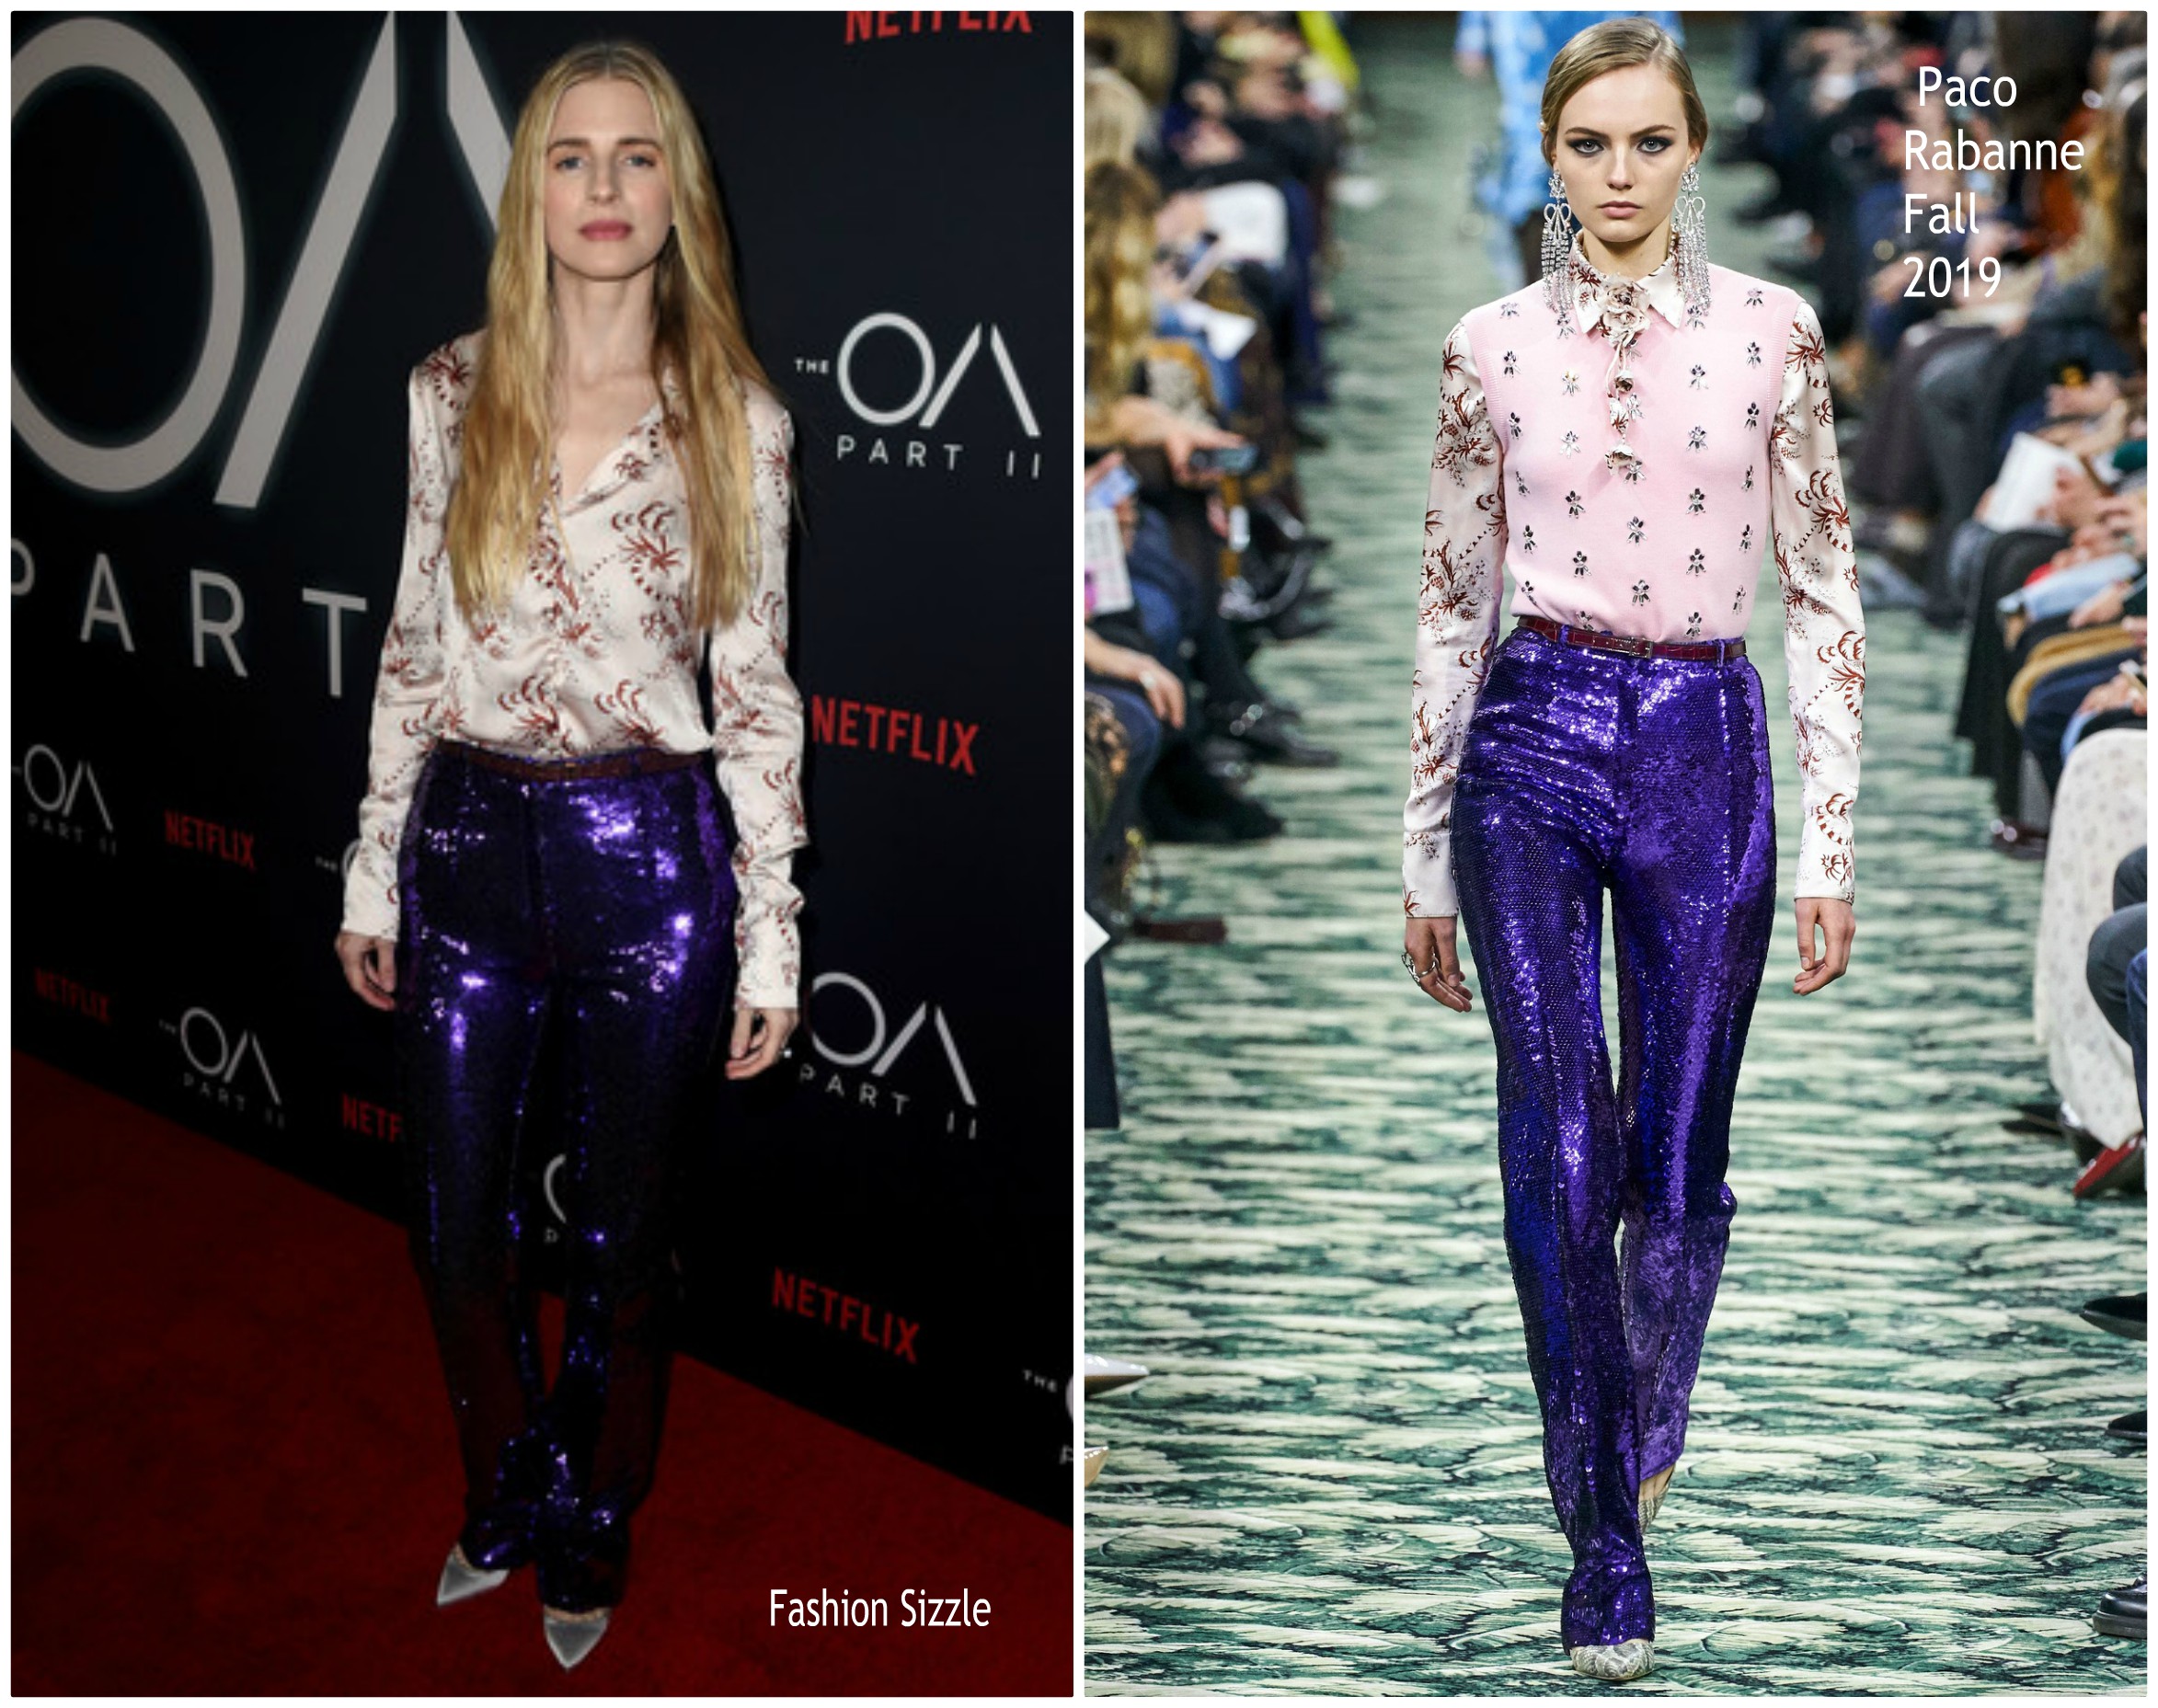 brit-marling-in-paco-rabanne-netflixs-the-oa-part-11-premiere